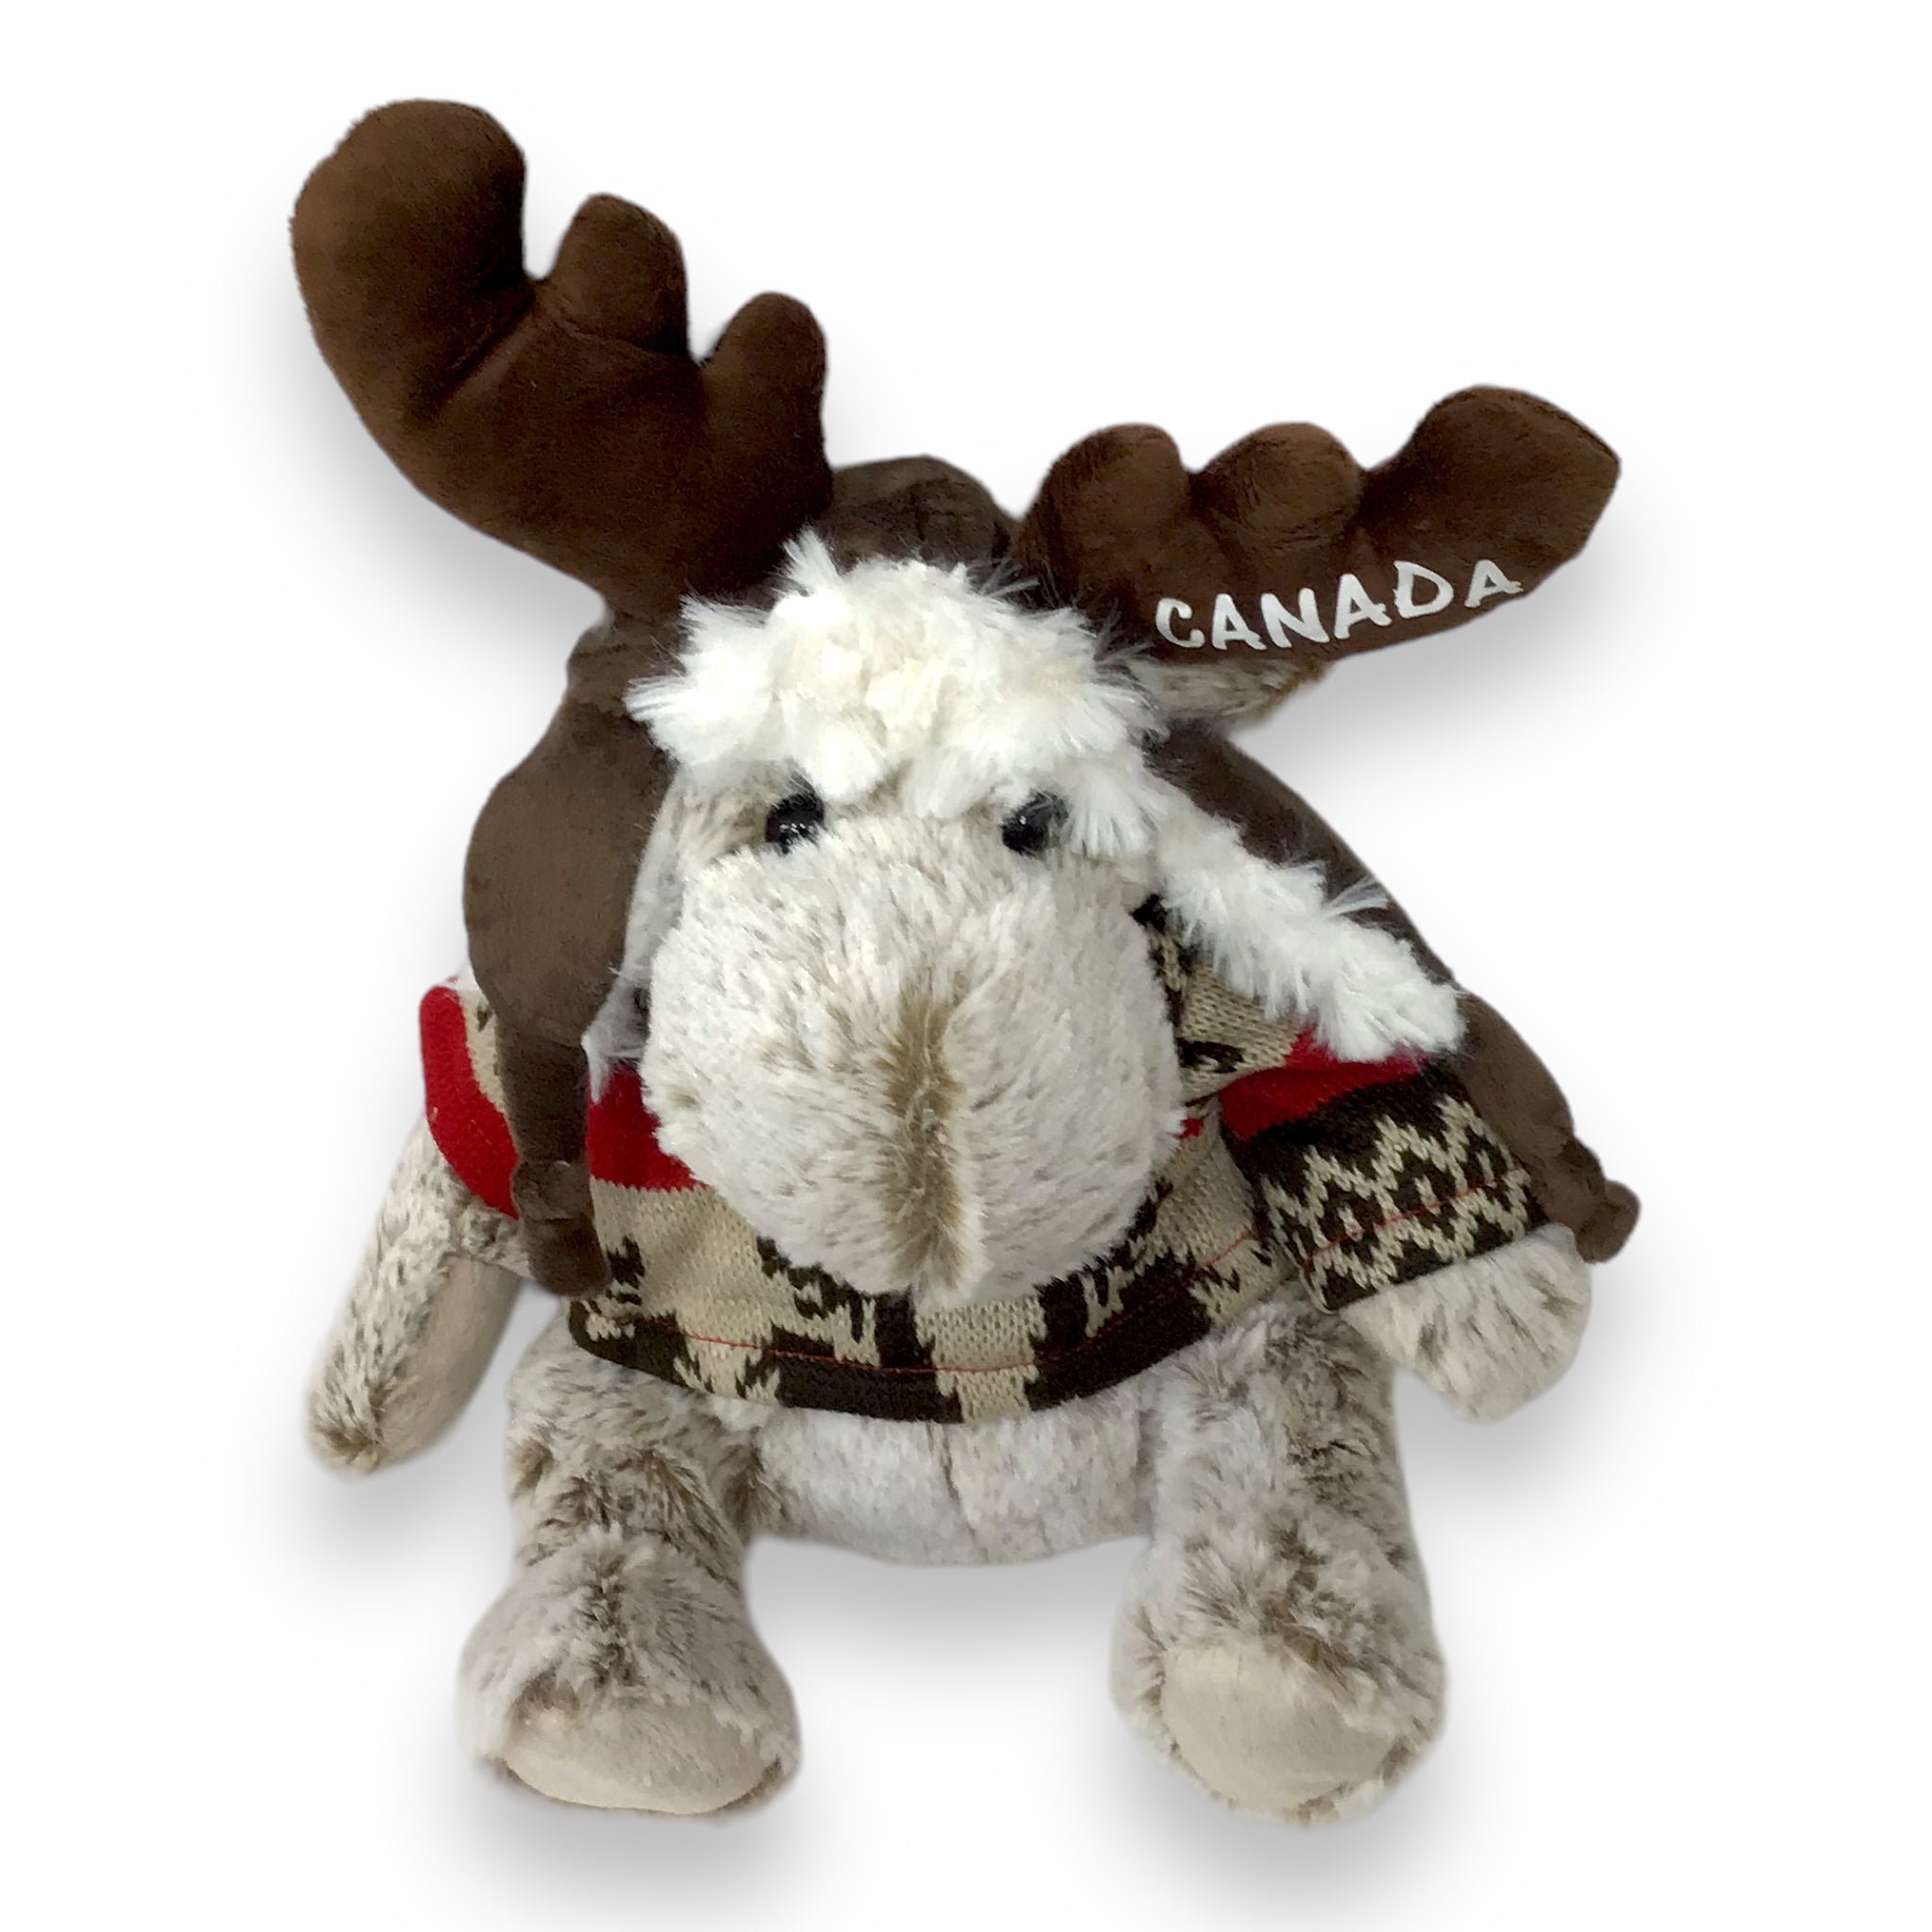 Canada Plush Moose Stuffed Animal - Soft Huggable Moose with Sweater and Hat, Adorable Playtime Plush Toy, Wild Life Cuddle Souvenir Gifts for Kids and Adults - 10 Inches